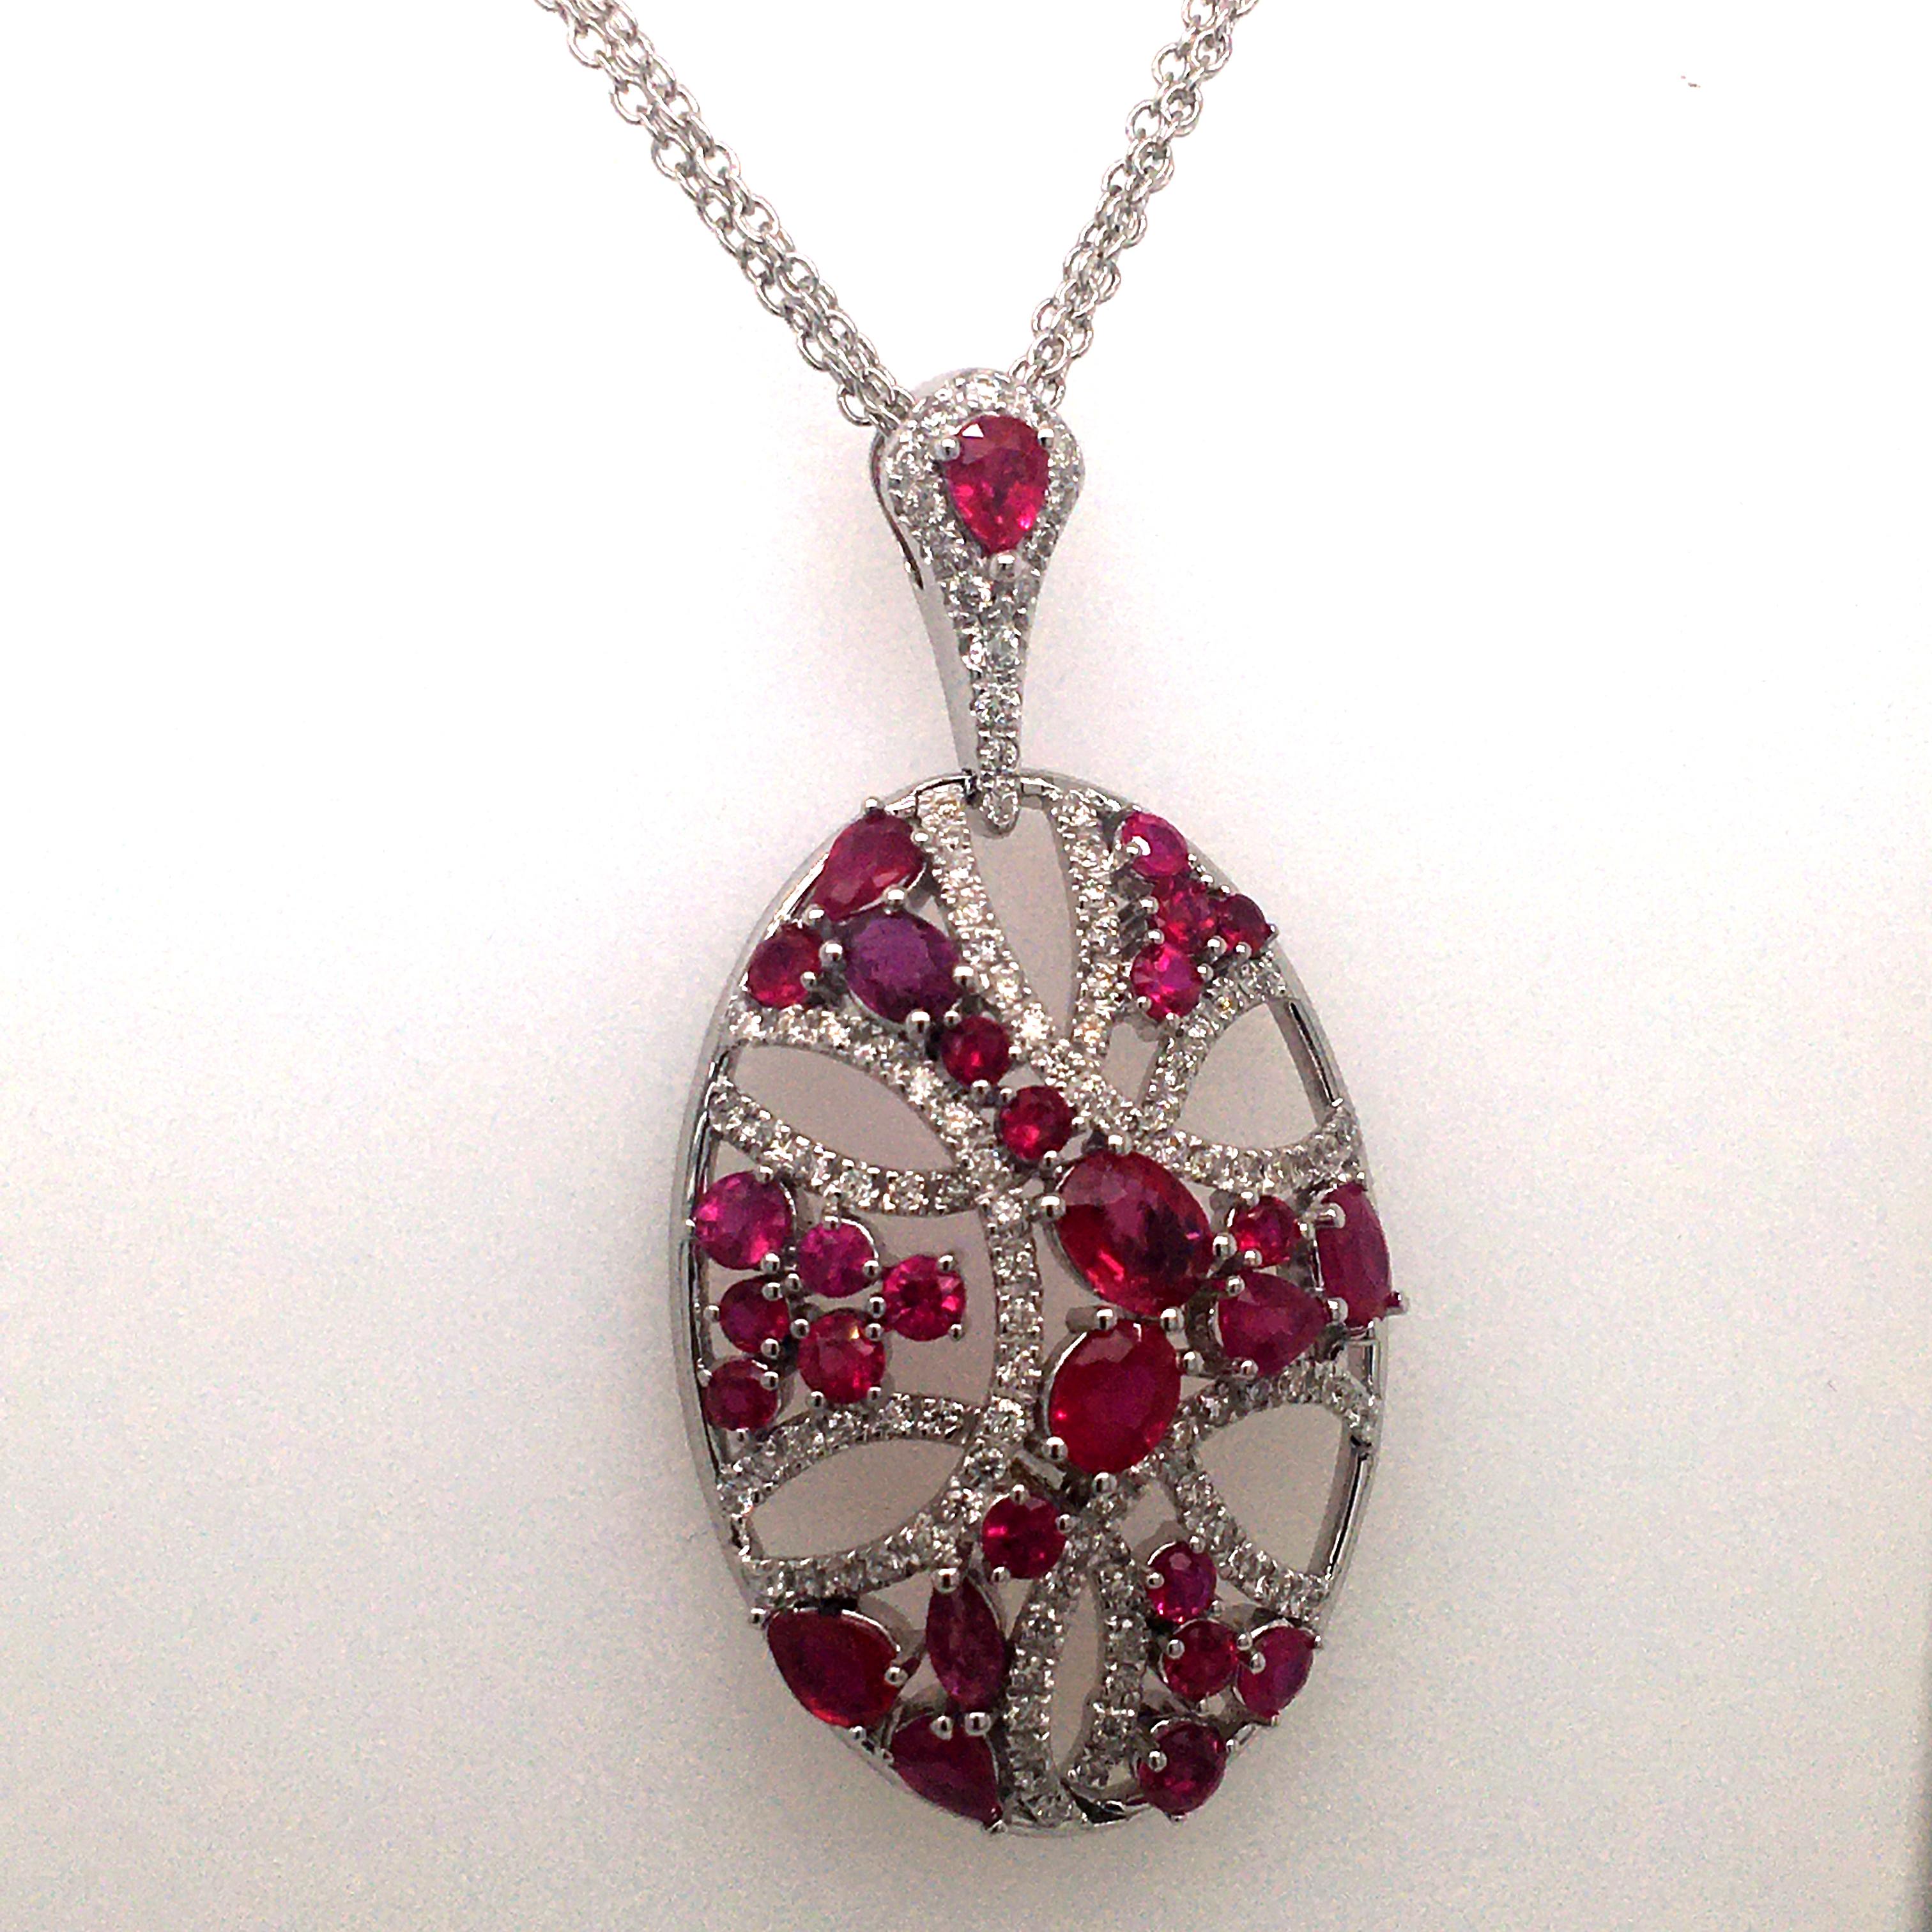 Art Nouveau 18 Karat White Gold Pendent Set with Diamonds and Ruby Made in Italy